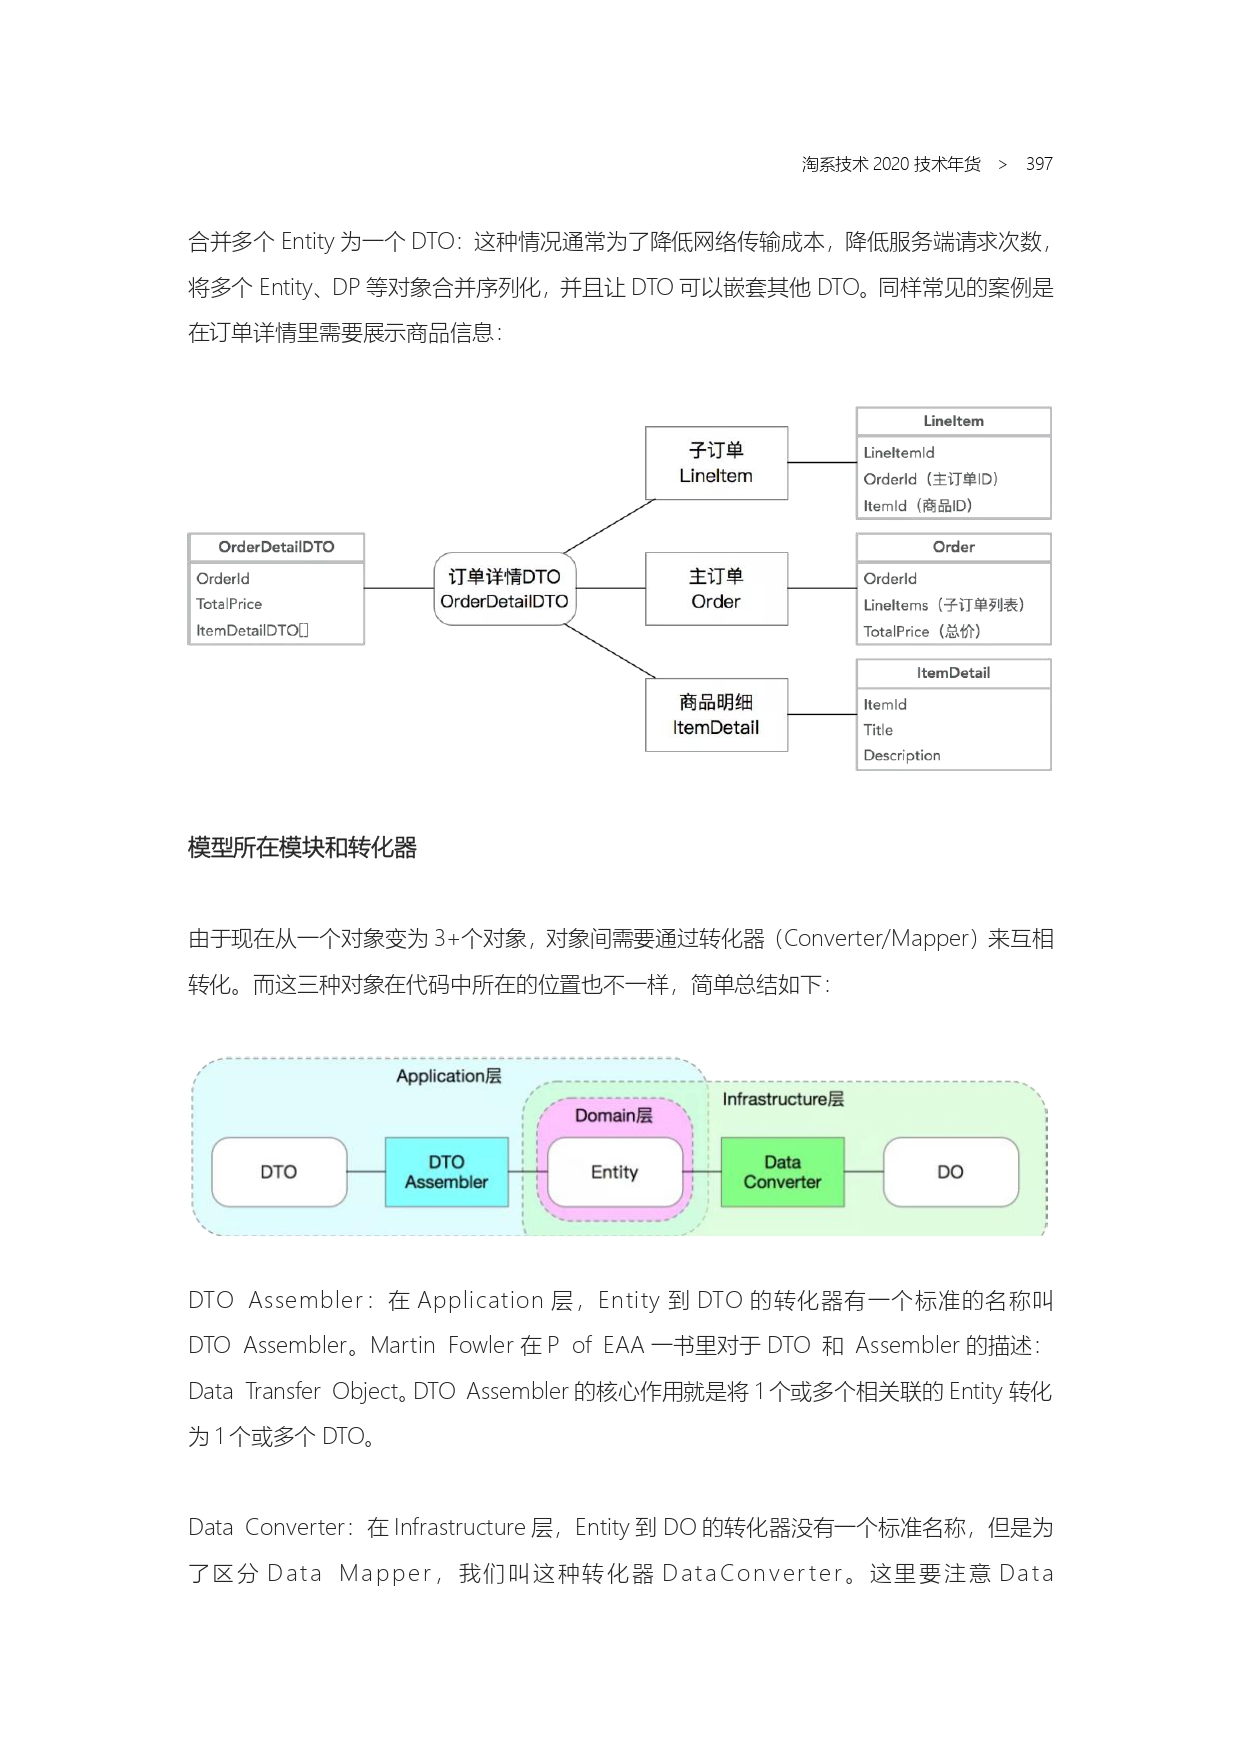 The Complete Works of Tao Technology 2020-1-570_page-0397.jpg